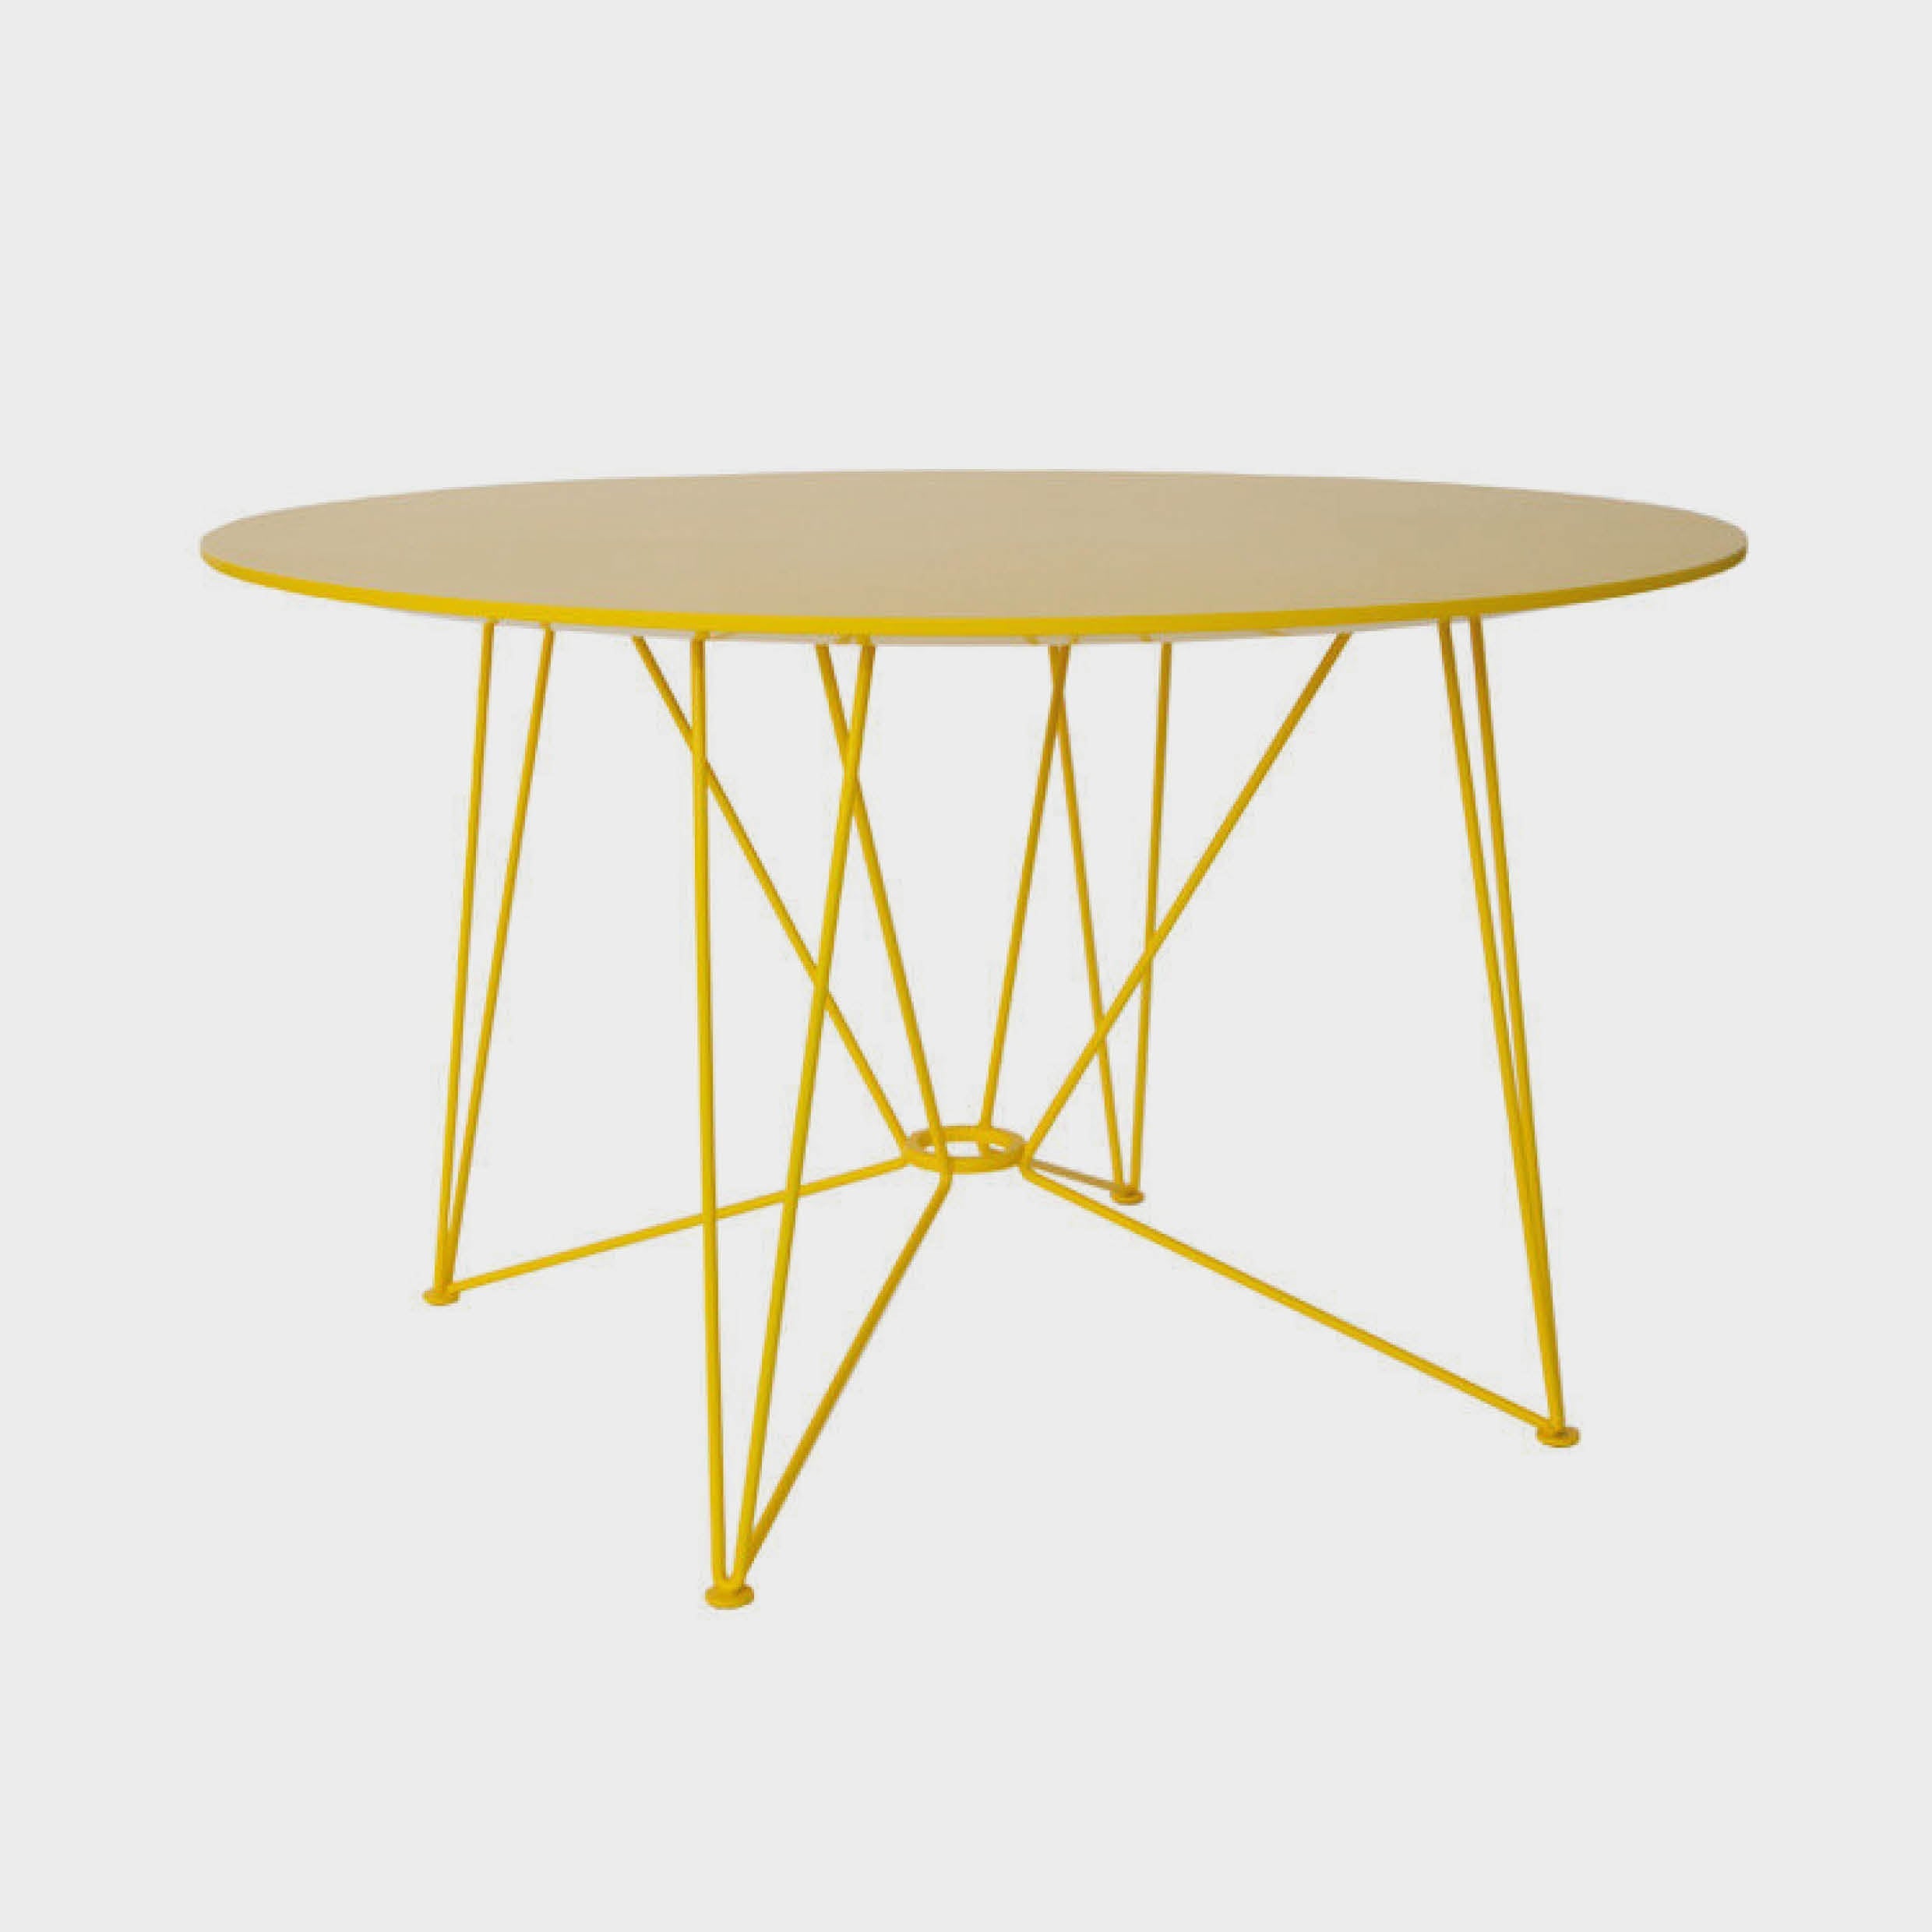 The Ring Table Citrus Yellow